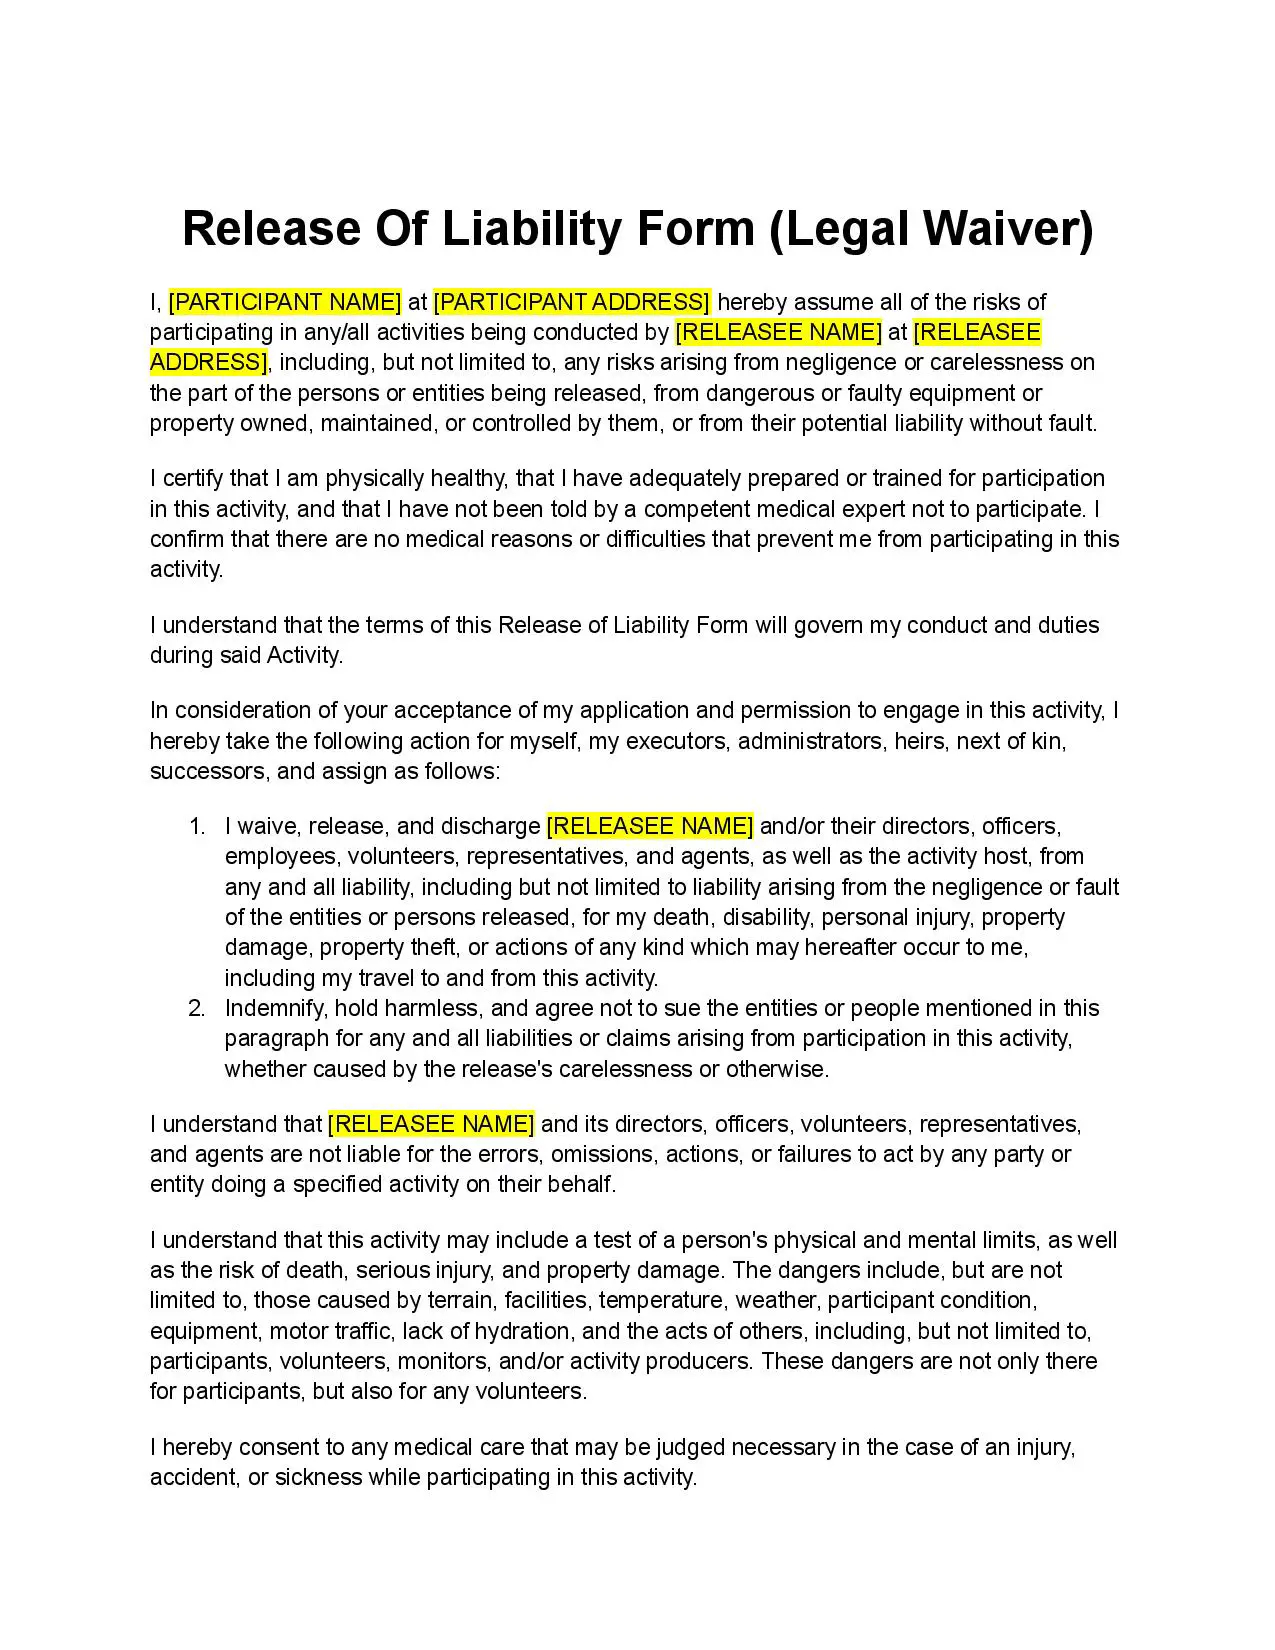 Release Of Liability Form Legal Waiver Template Free Download